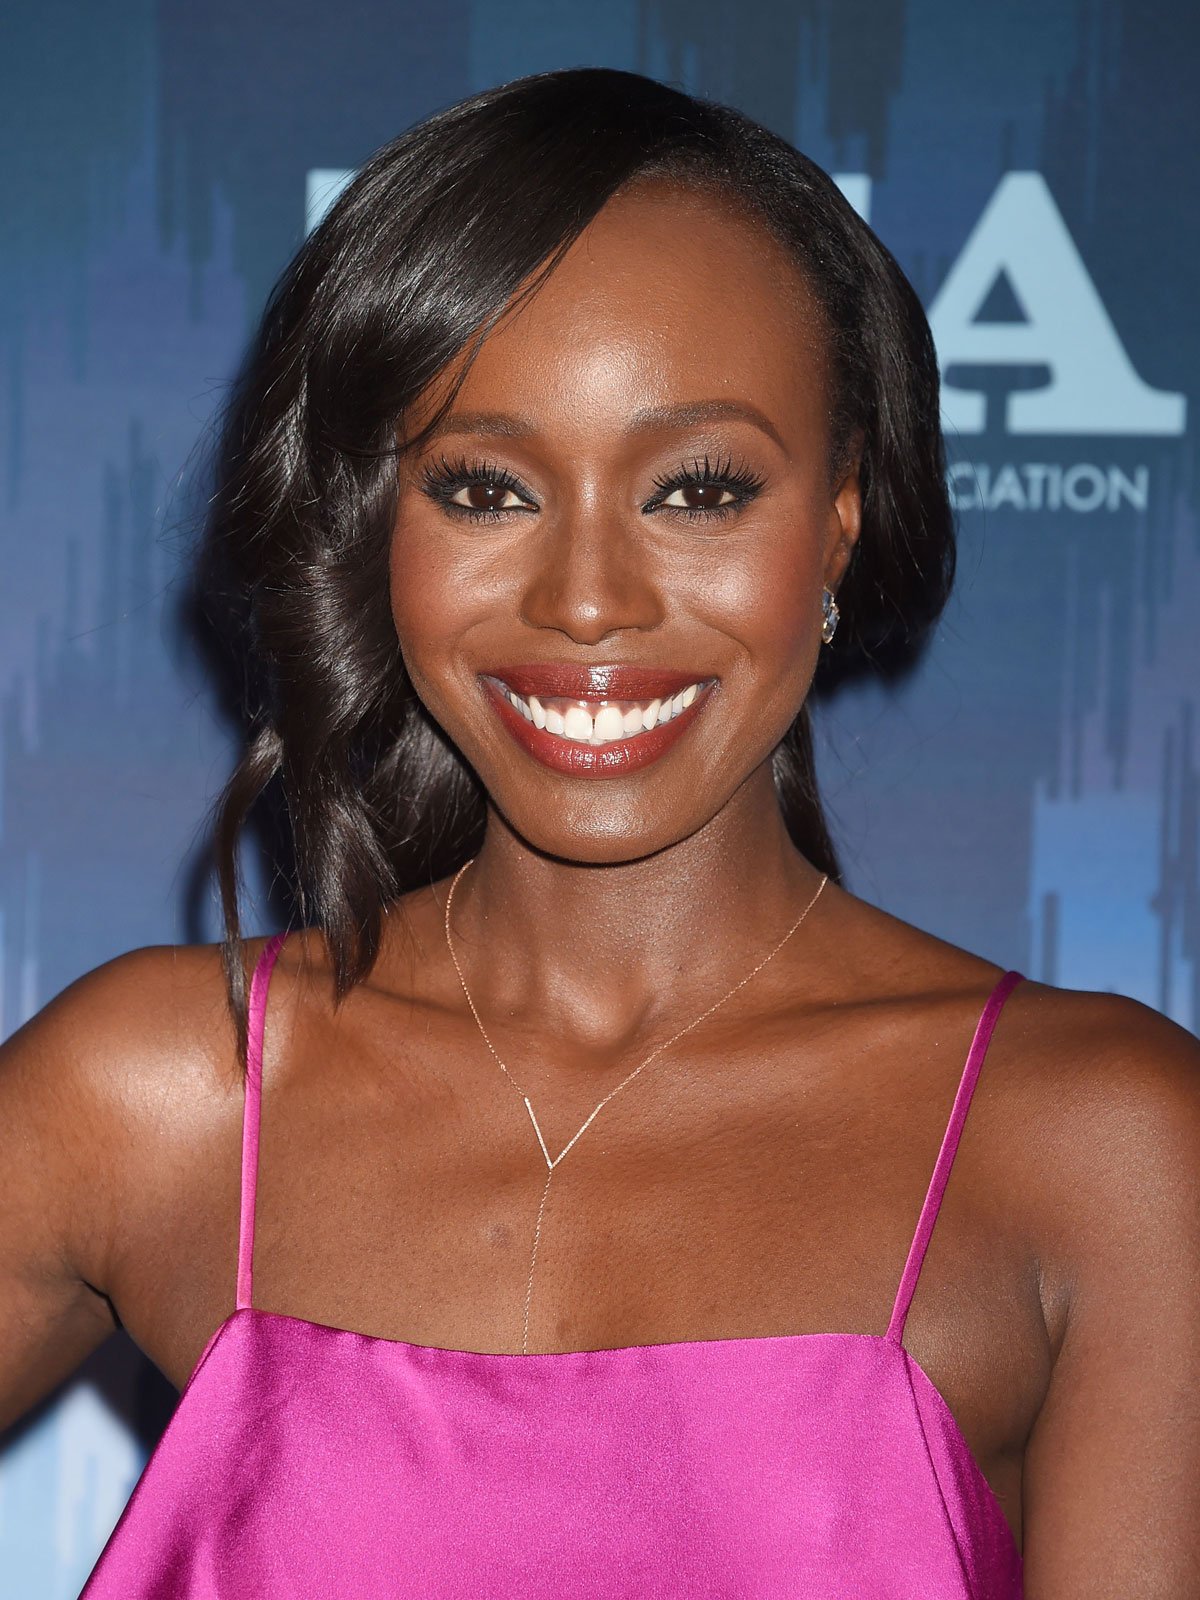 Anna Diop How Tall Is She Height Weight And Body Meas - vrogue.co